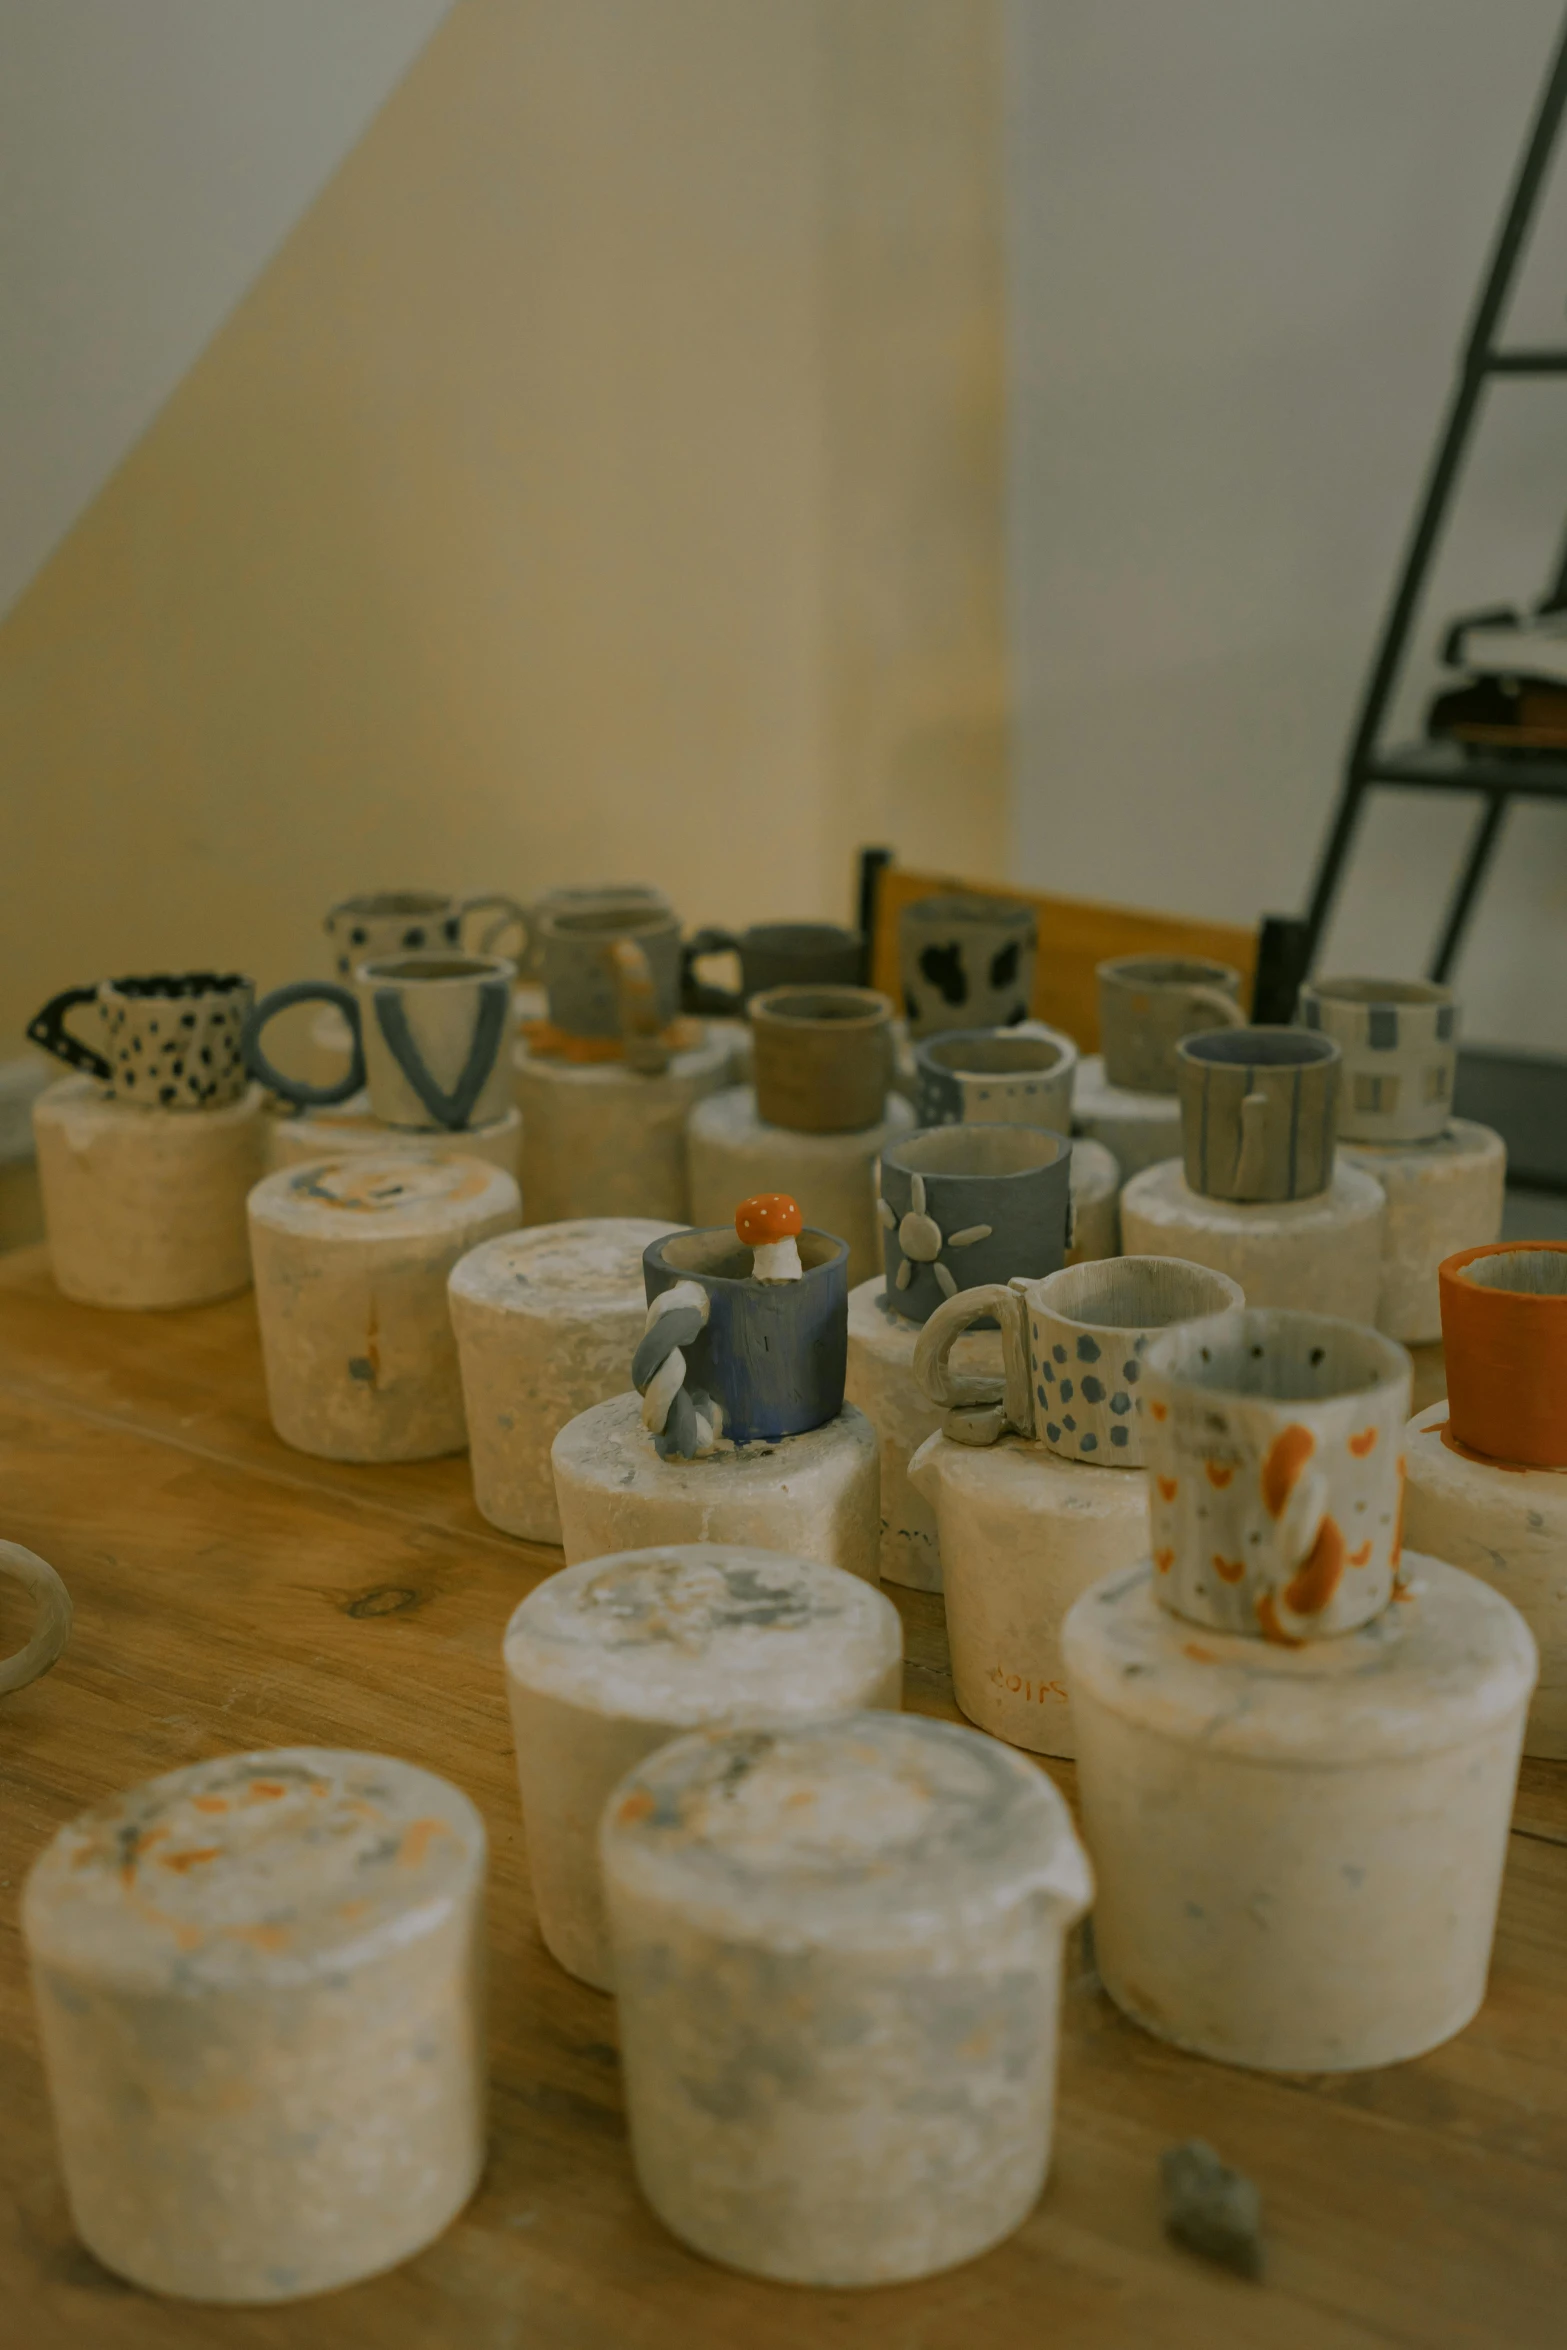 several stacks of pottery pots on a wooden table